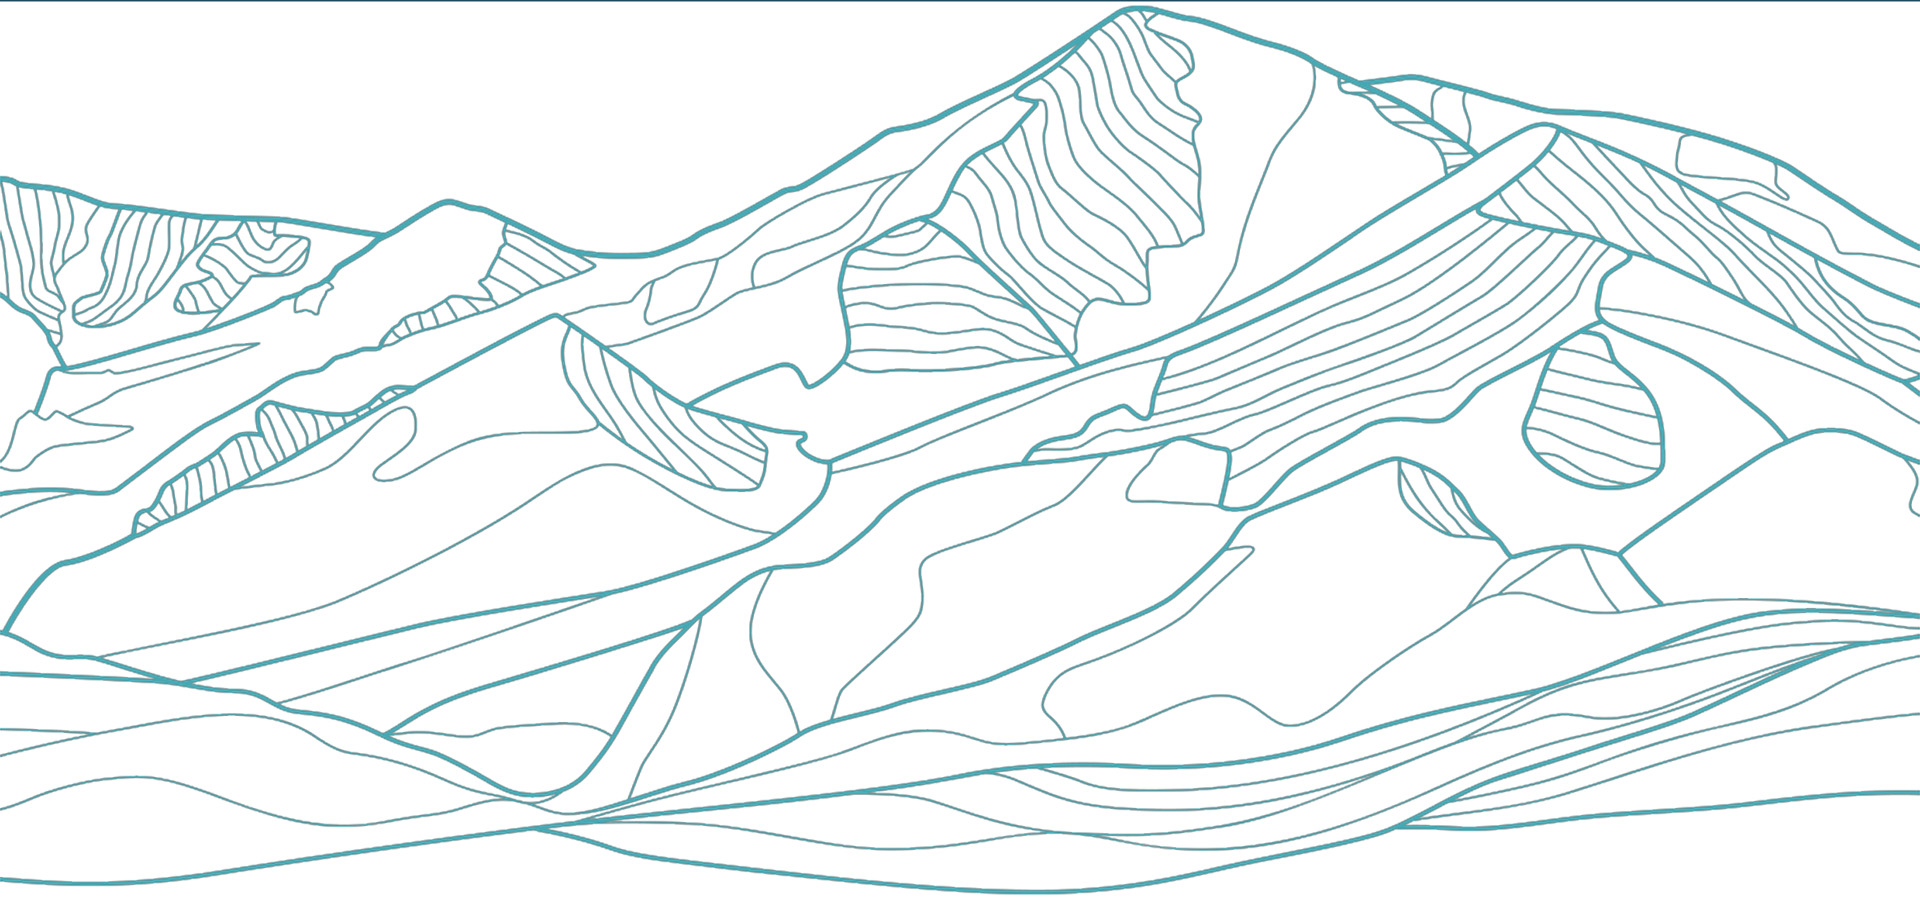 line drawing of mountains